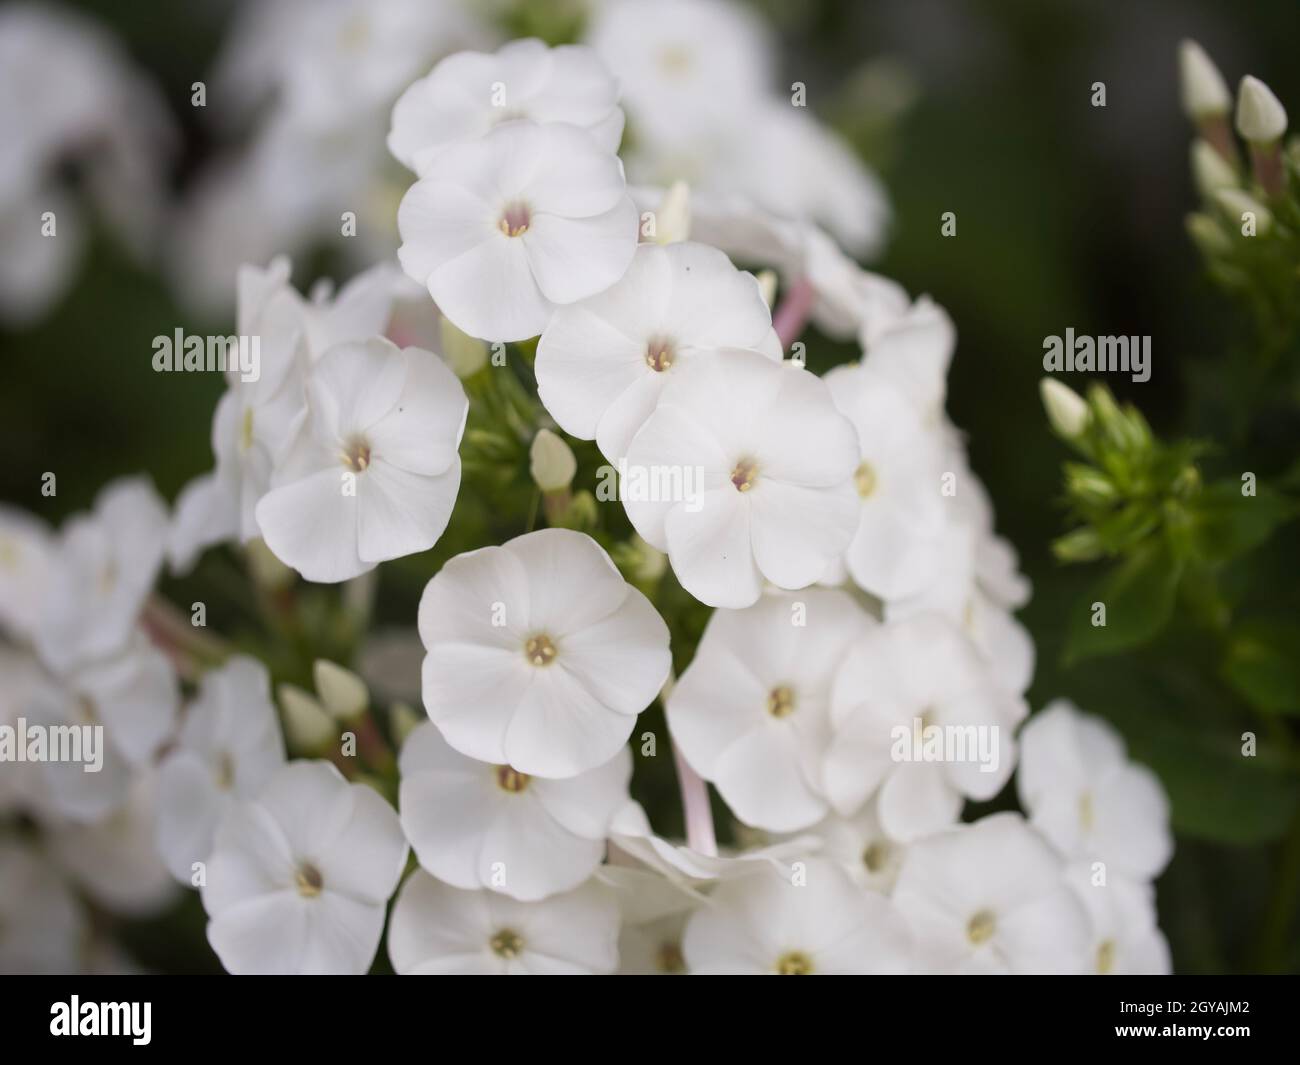 Inflorescence of white phlox flowers, close-up. Flowers with white petals. Stock Photo